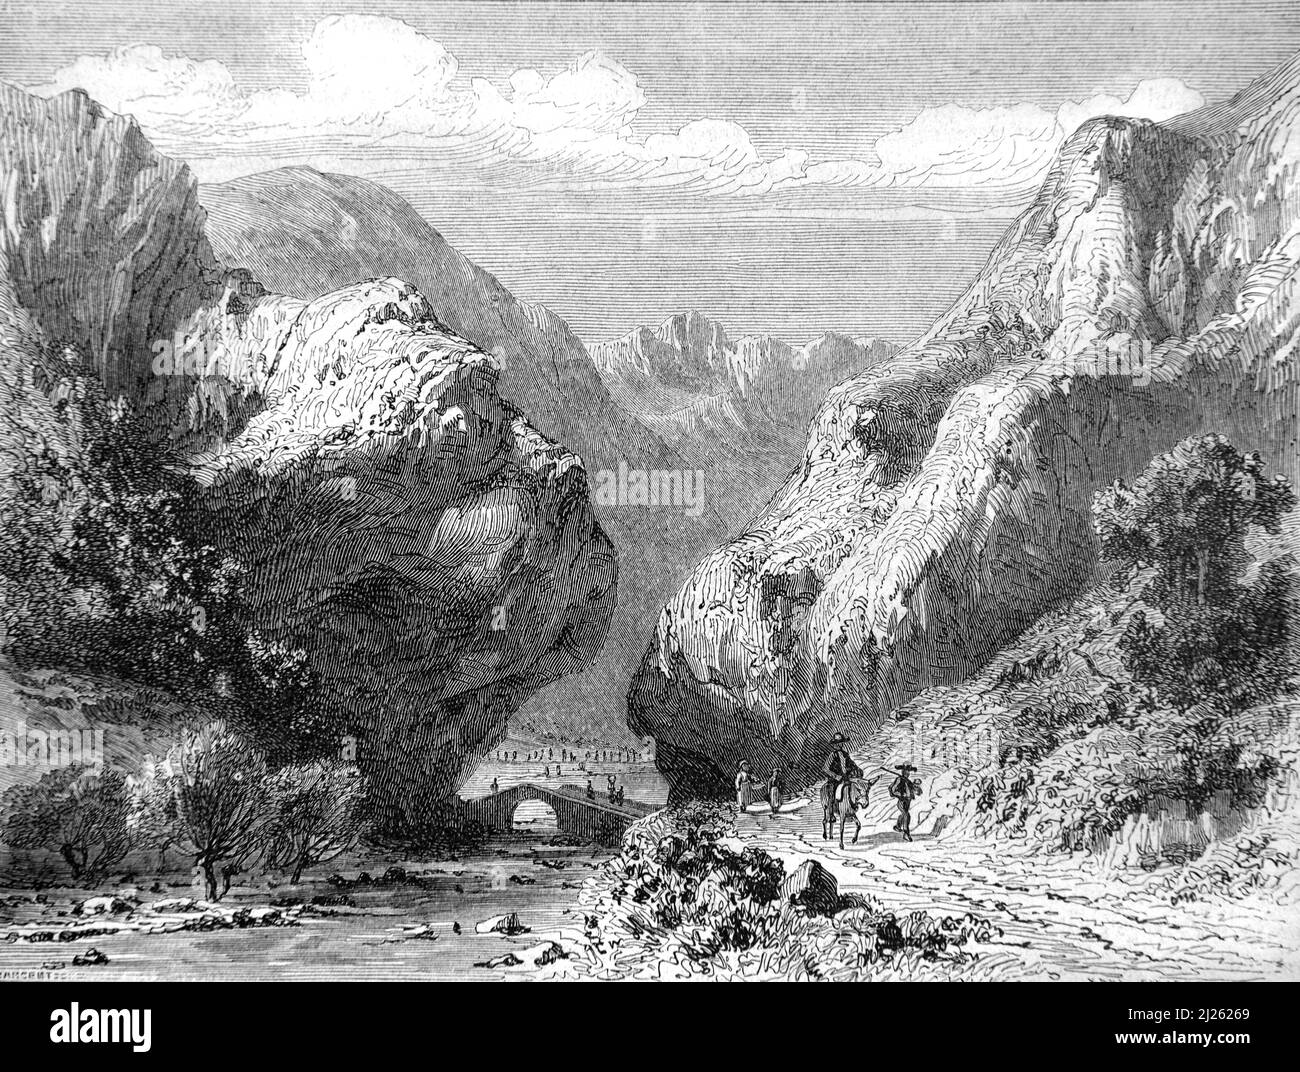 The Roumeyer Valley and the Glandasse Mountain (2041m) Range in the Pays Diois, in the Vercors Massif or Vercors Regional Park Drôme France. Vintage Illustration or Engraving 1860. Stock Photo